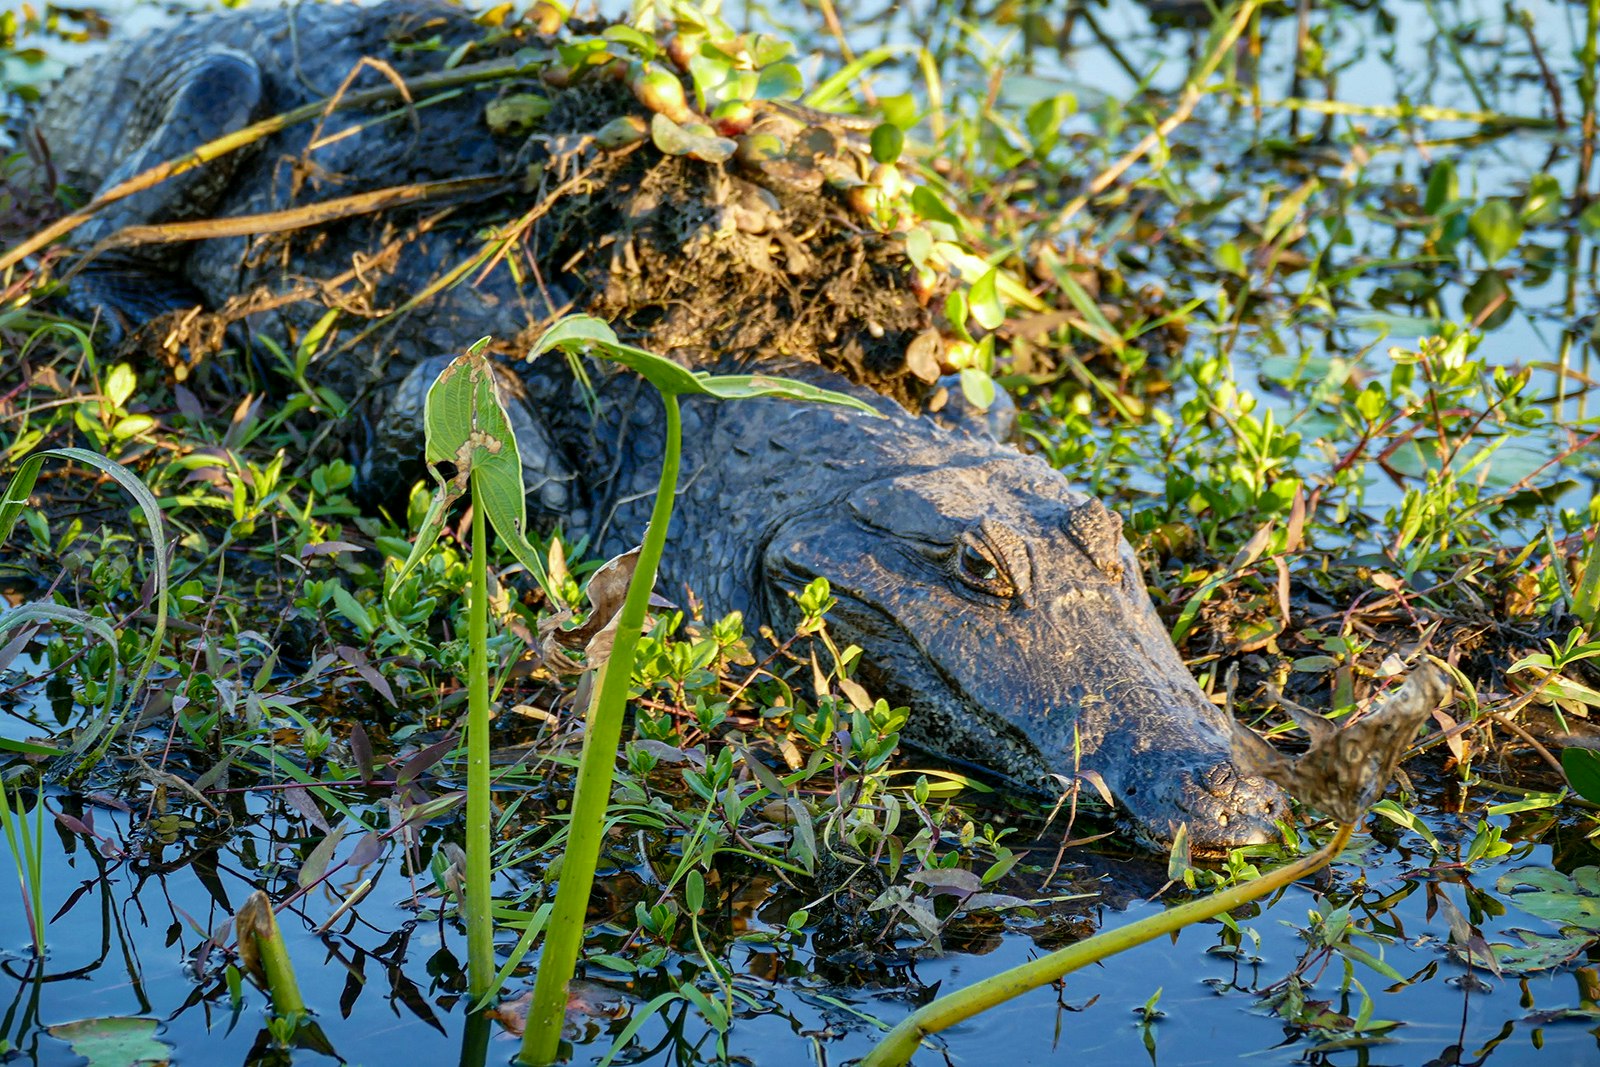 A caiman sits in a clump of wet grasses and plants in the Ibera Wetlands, Argentina.